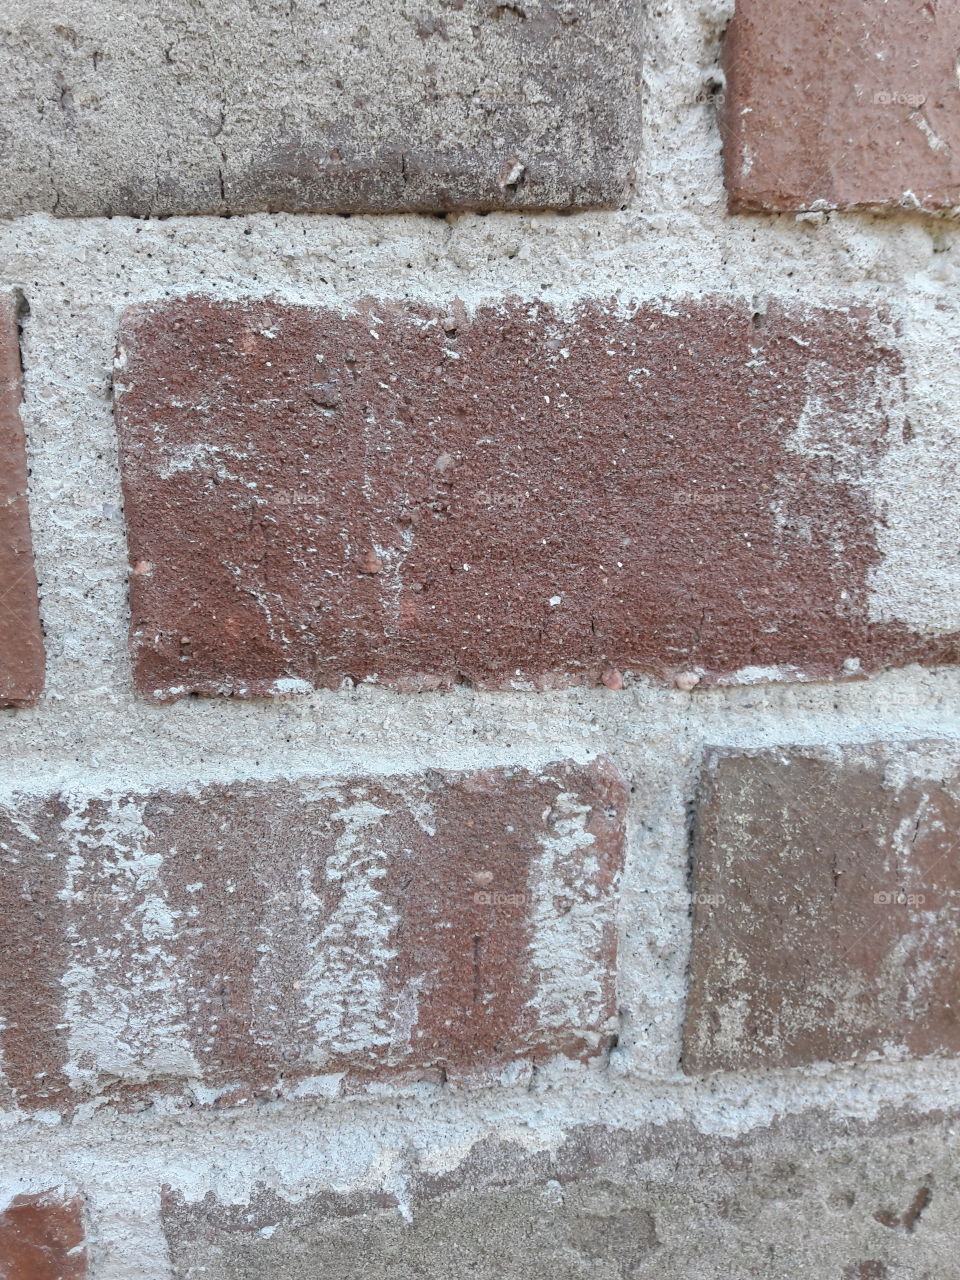 Close up of bricks from an out door stove.